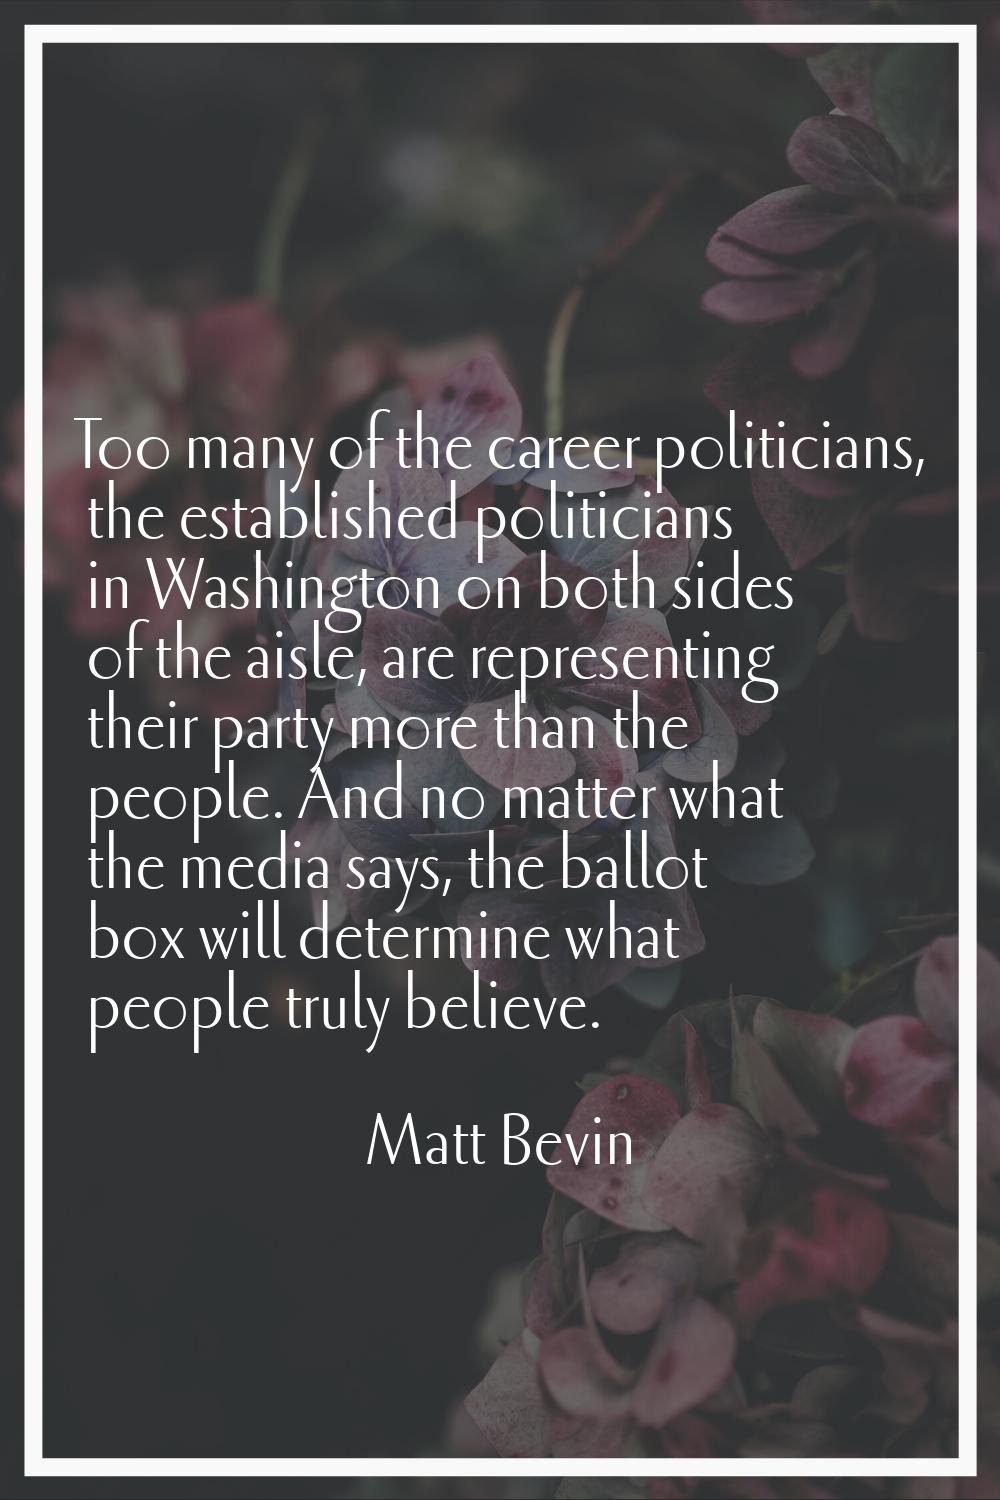 Too many of the career politicians, the established politicians in Washington on both sides of the 